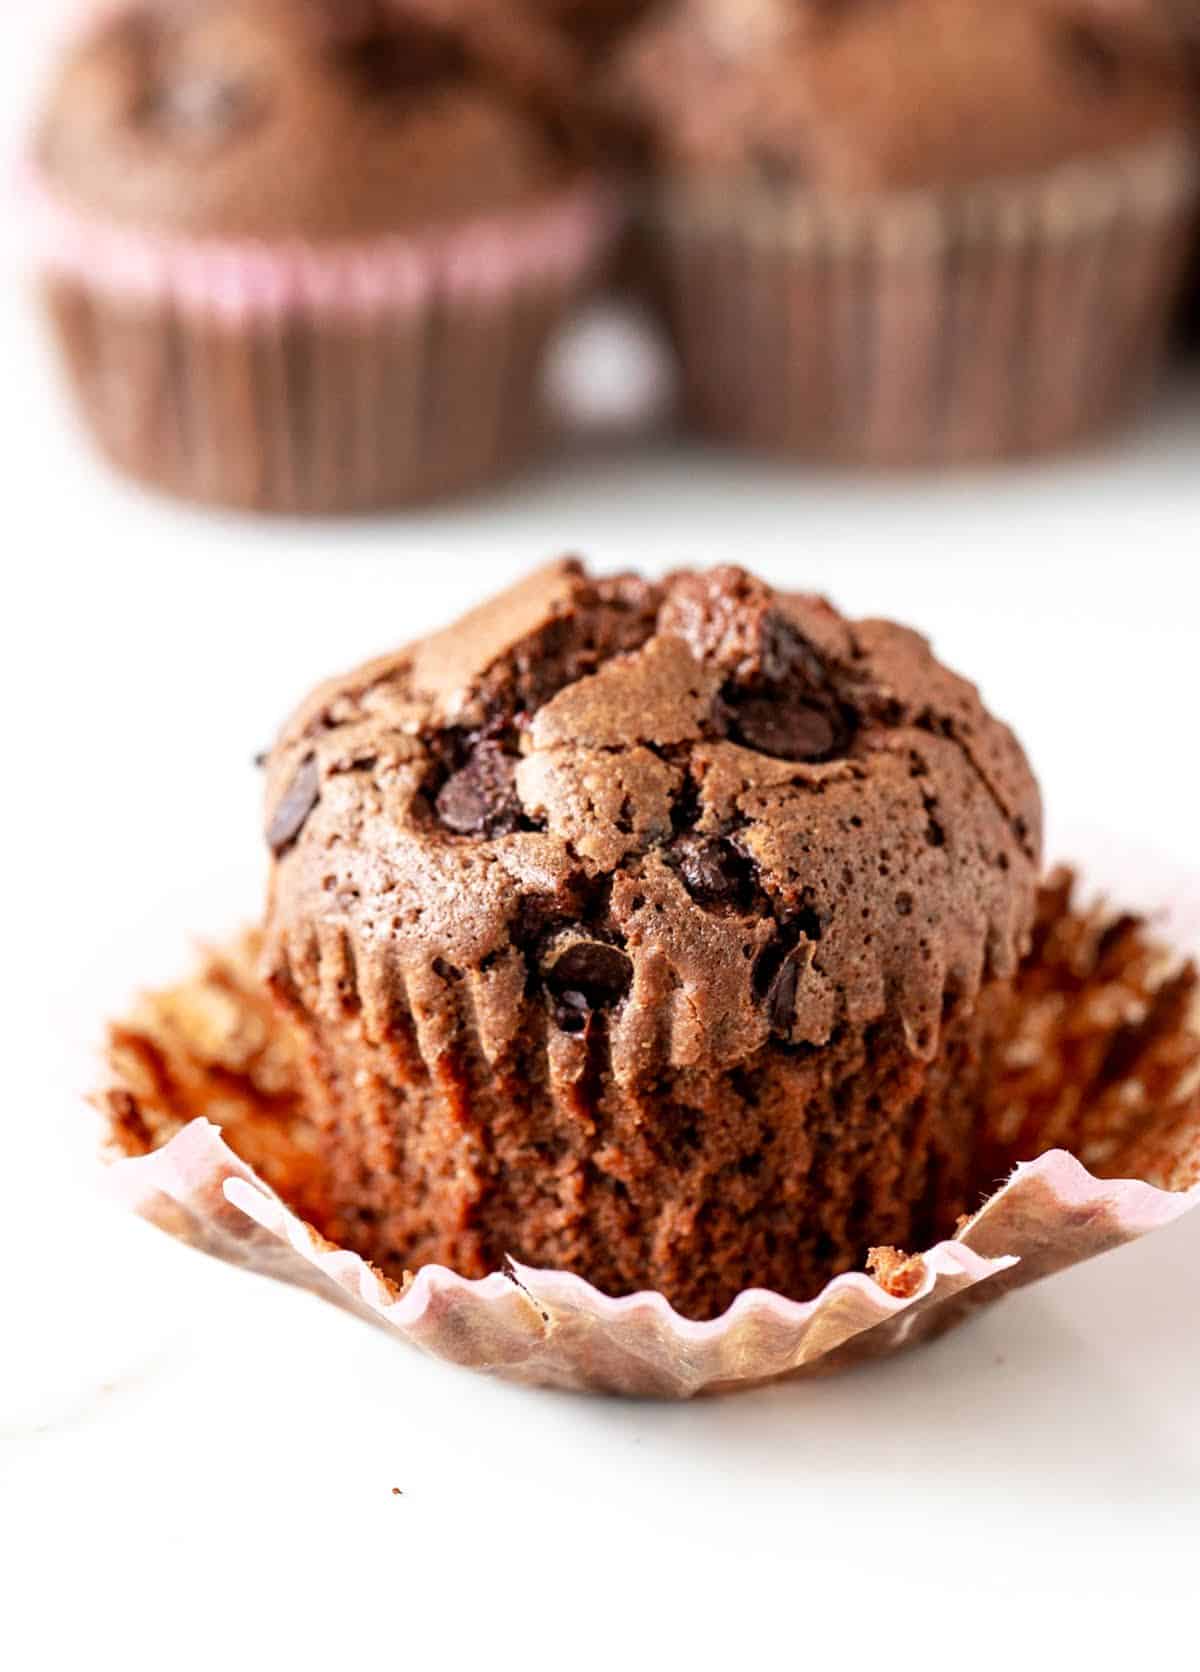 Single chocolate muffin, opened paper liner, white surface, more muffins in background.